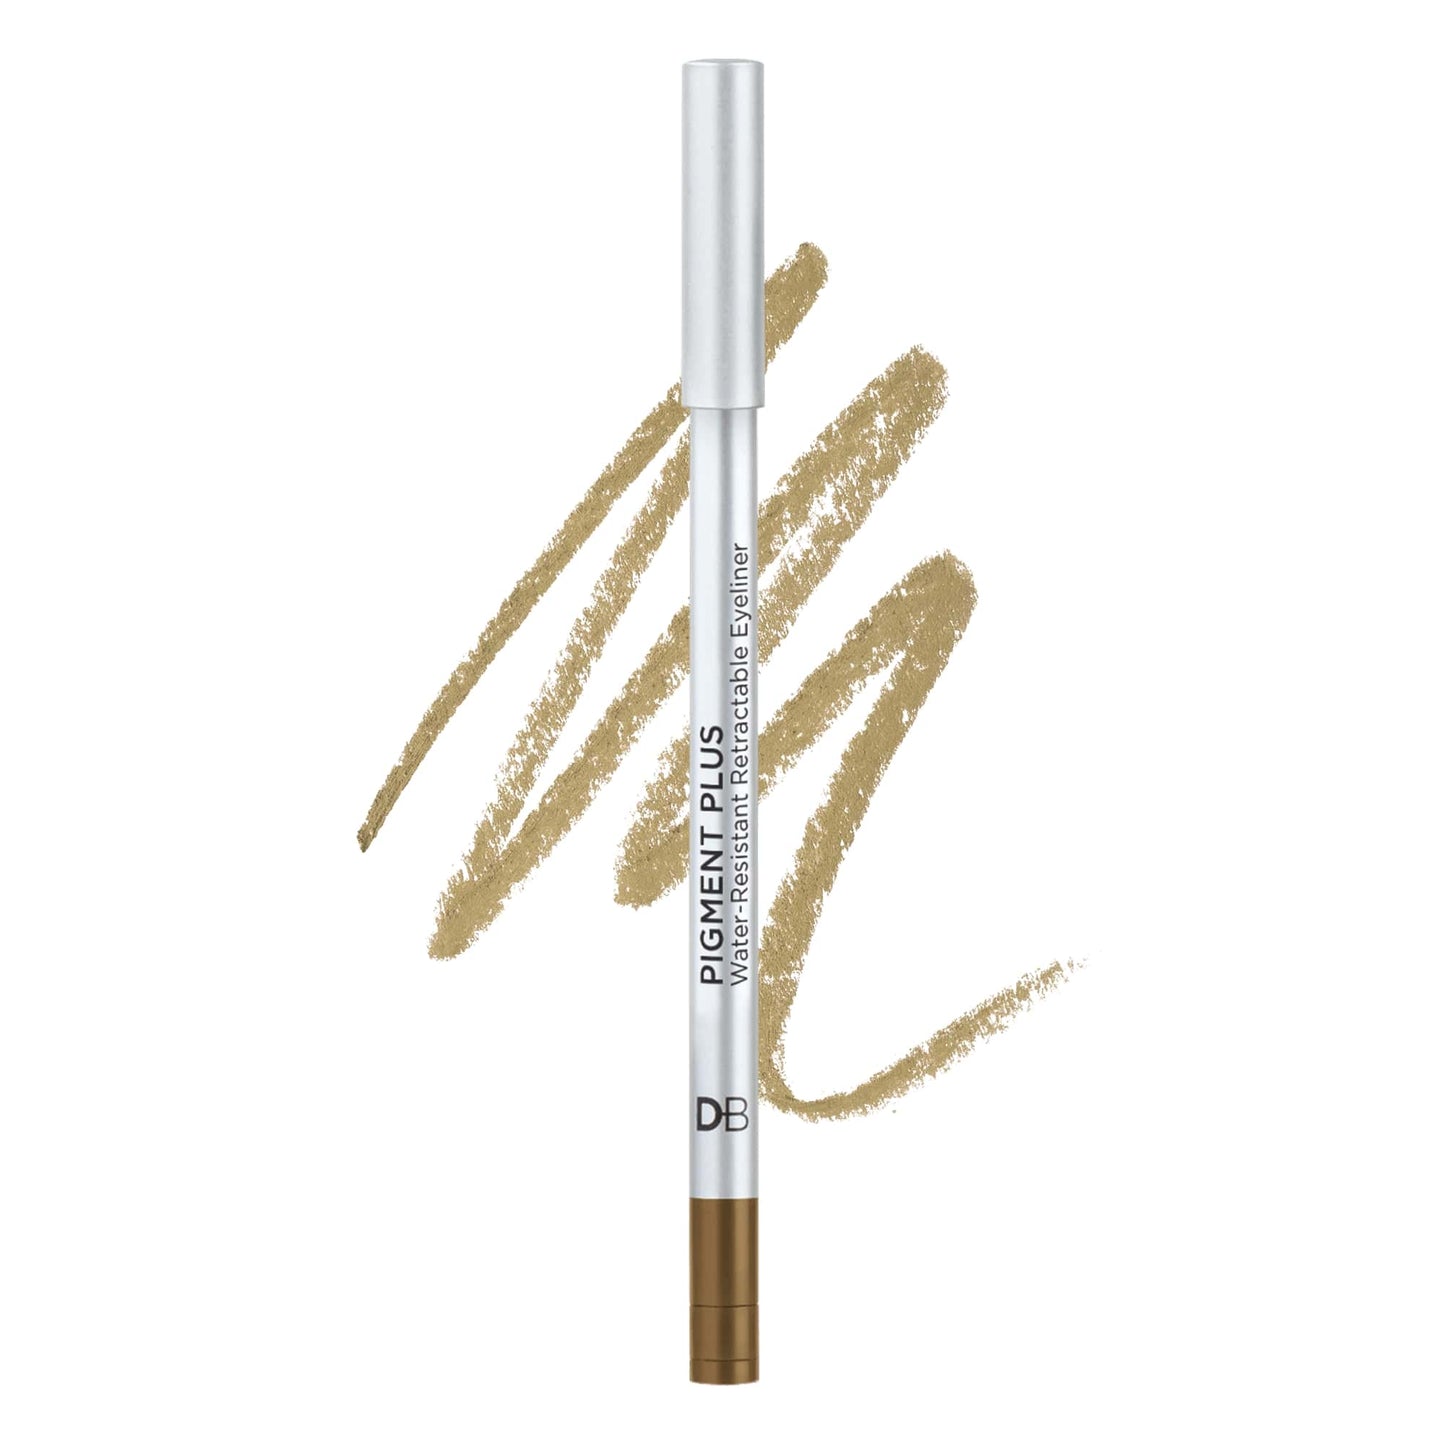 Pigment Plus Water Resistant Eyeliner (Gold Rush) with swatch | DB Cosmetics